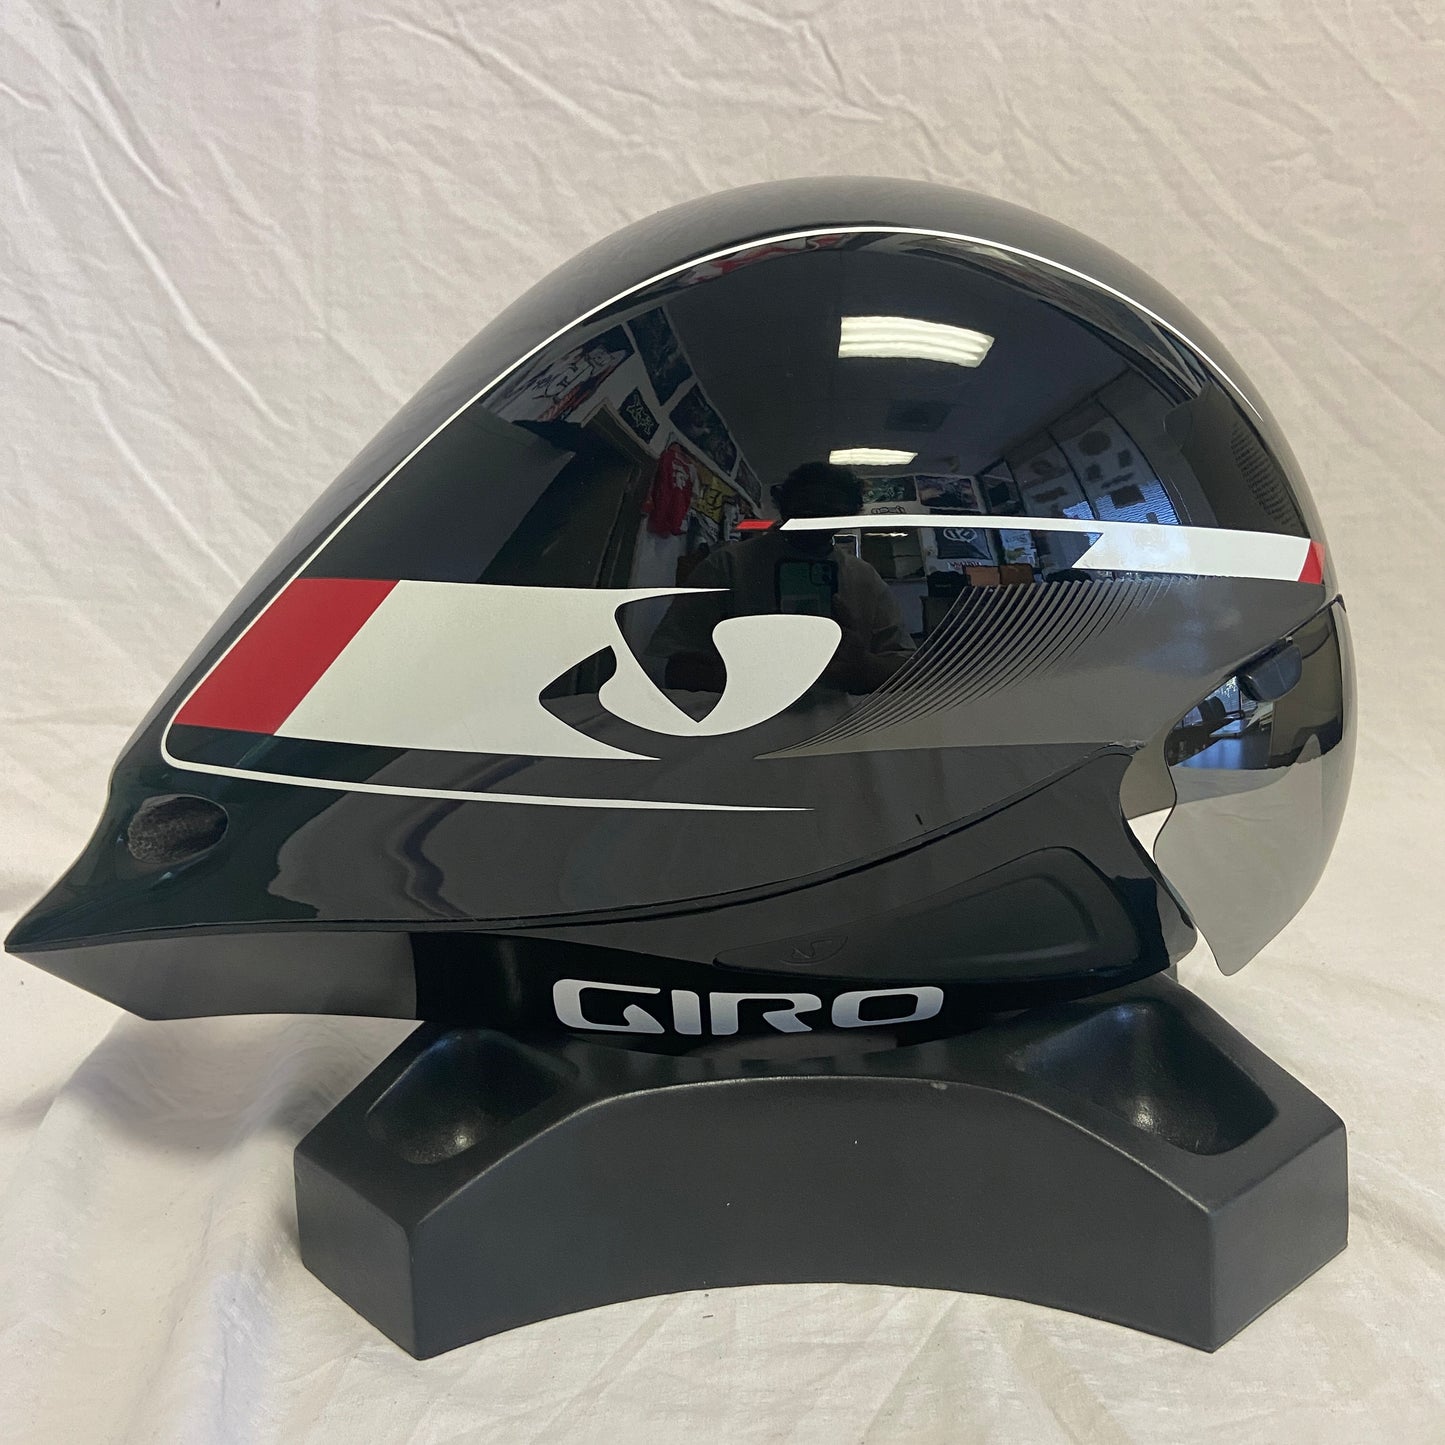 Giro Selector Race Bicycle Helmet Red / White / Black Small (Open Box) - ExtremeSupply.com